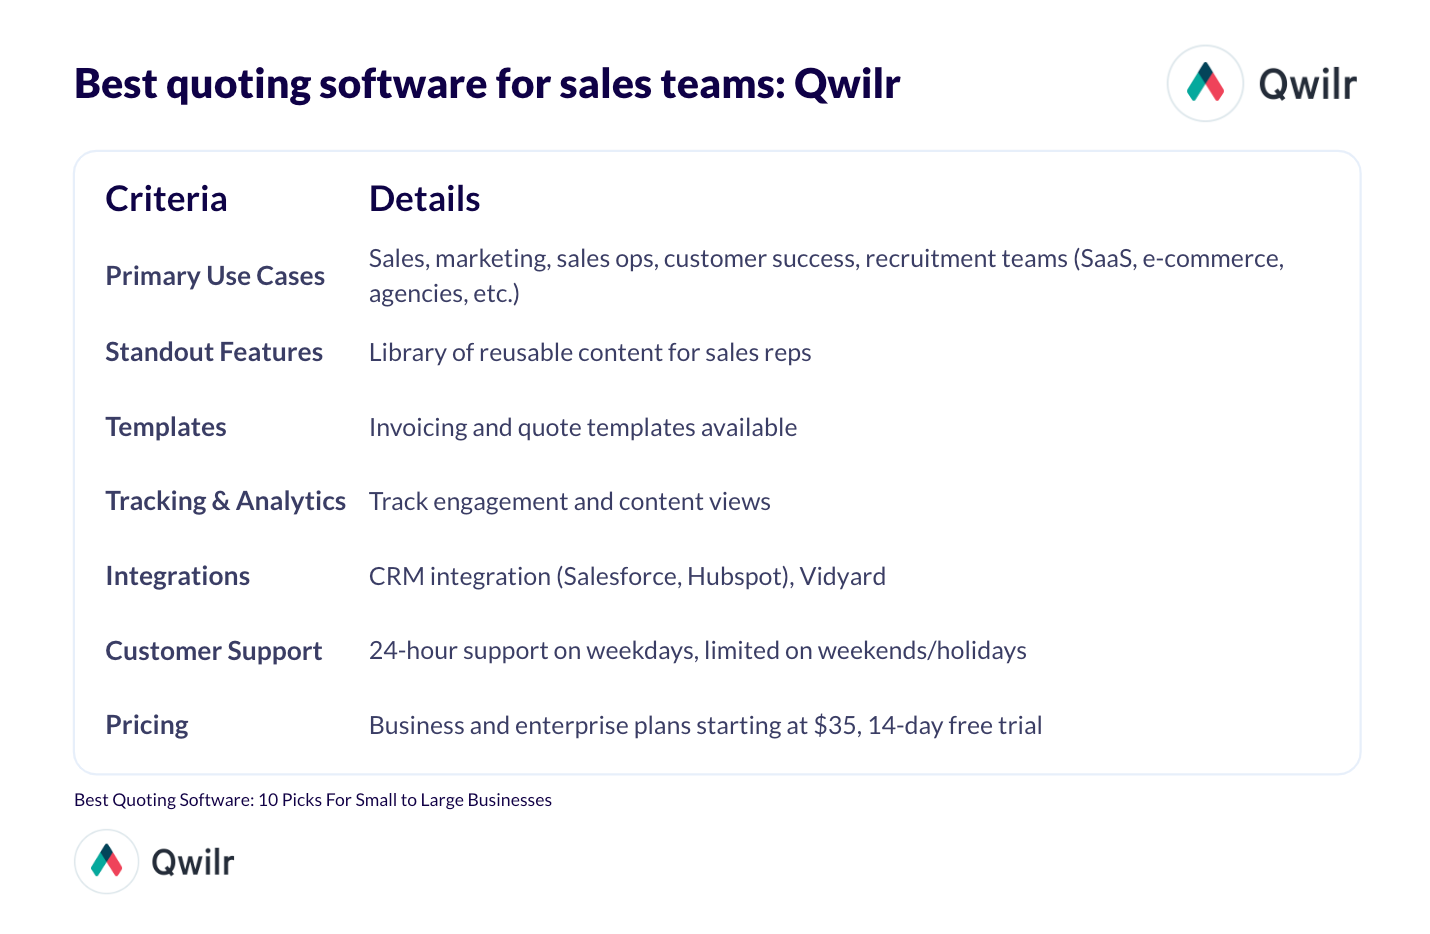 Summary table of Qwilr for sales teams